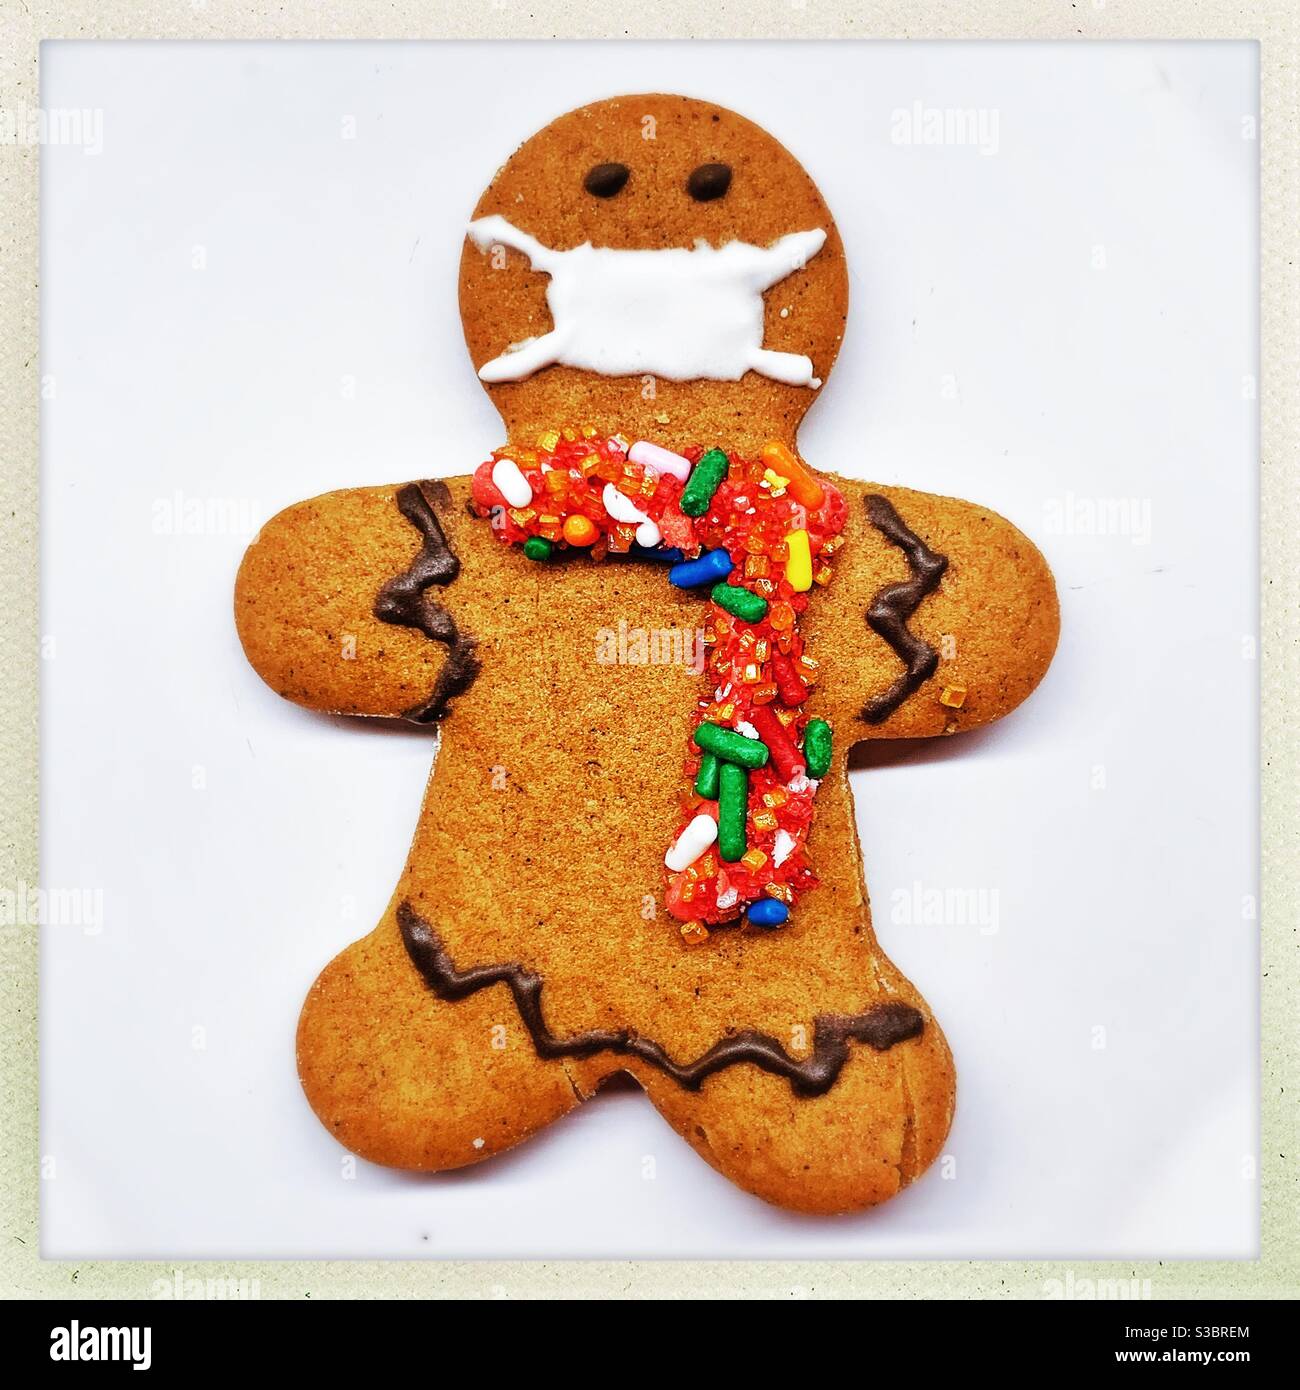 A homemade gingerbread man cookie is decorated with a colorful candy scarf and a face mask. Stock Photo